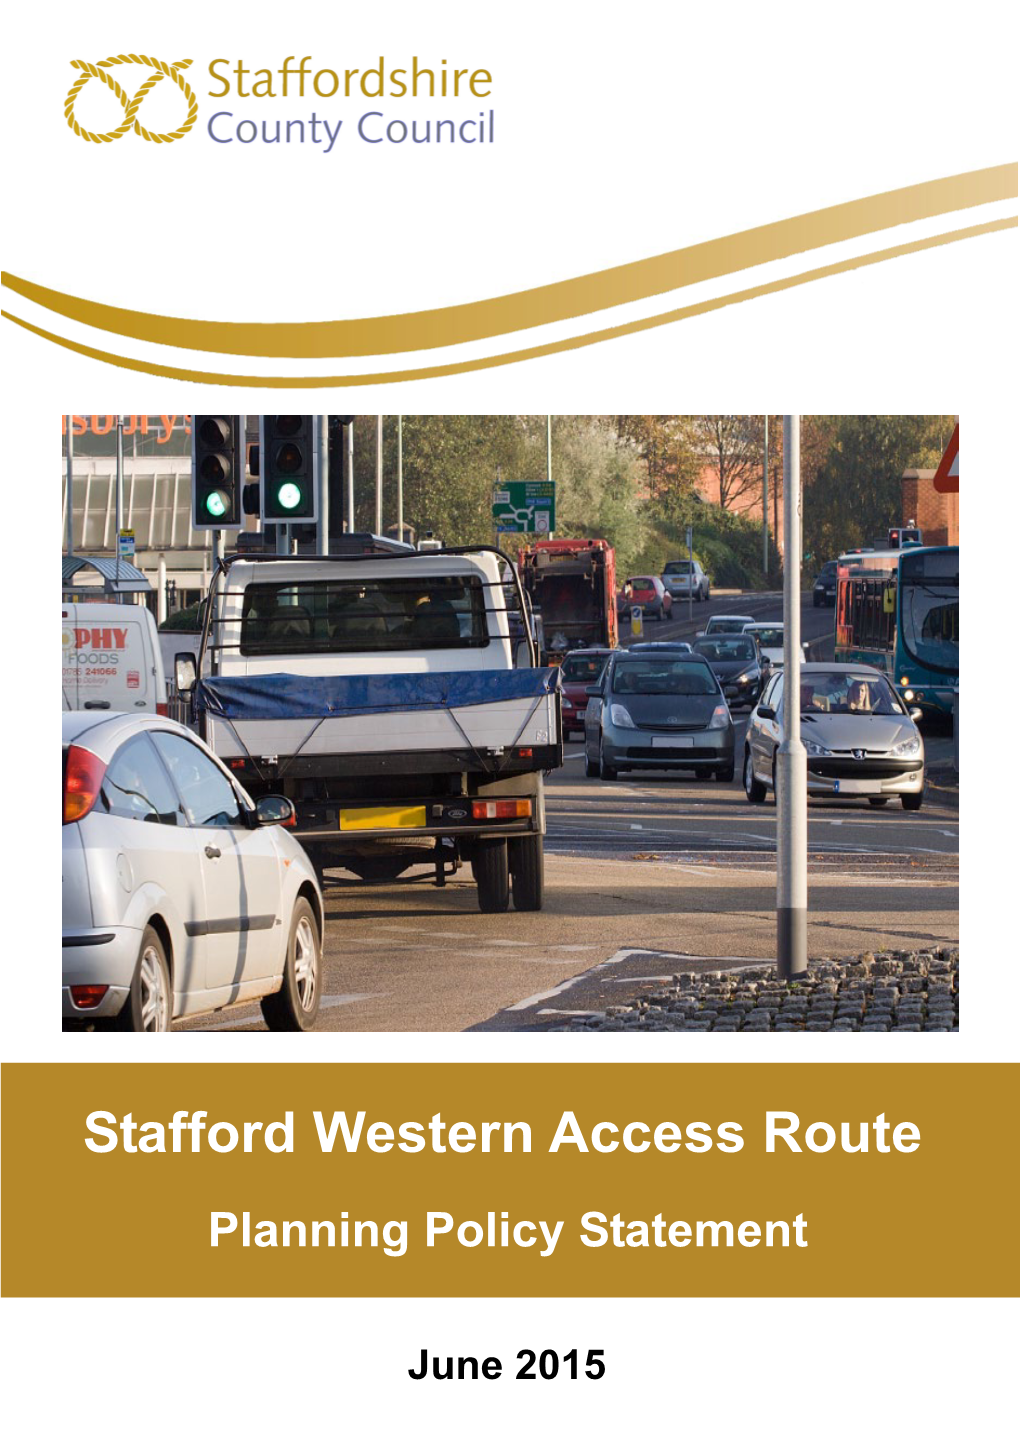 Stafford Western Access Route Planning Policy Statement